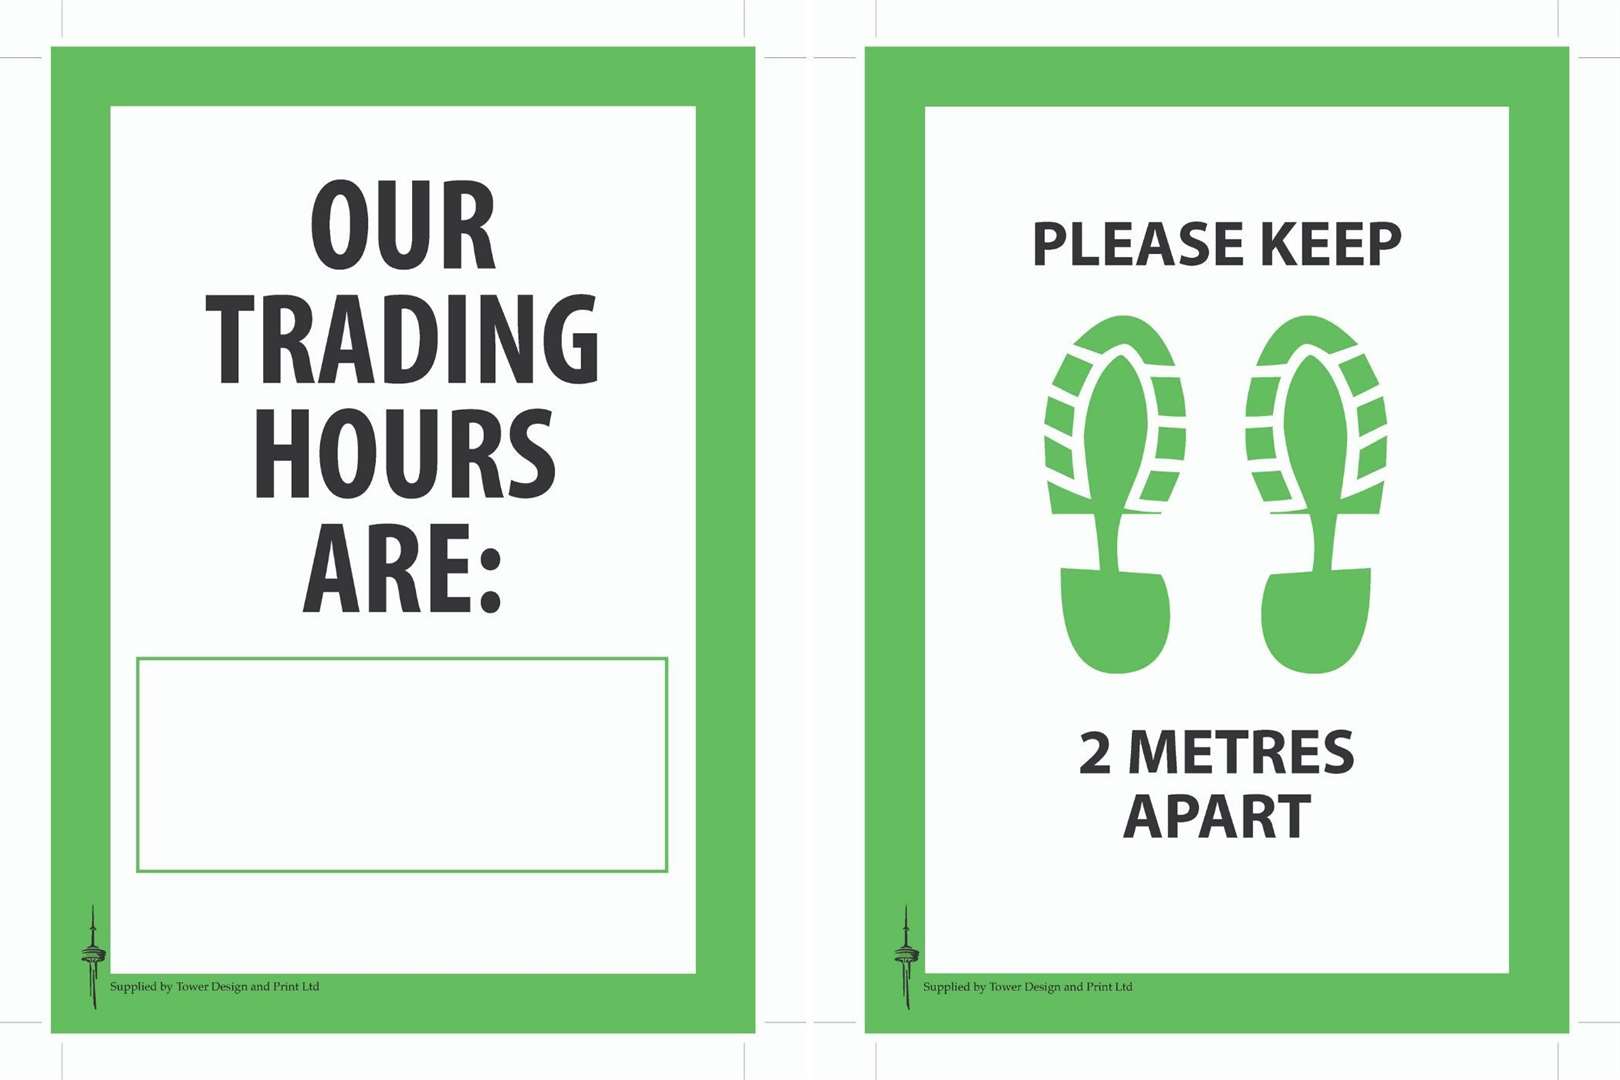 Opening hours and social distancing reminders are on these posters created by Tower Design & Print